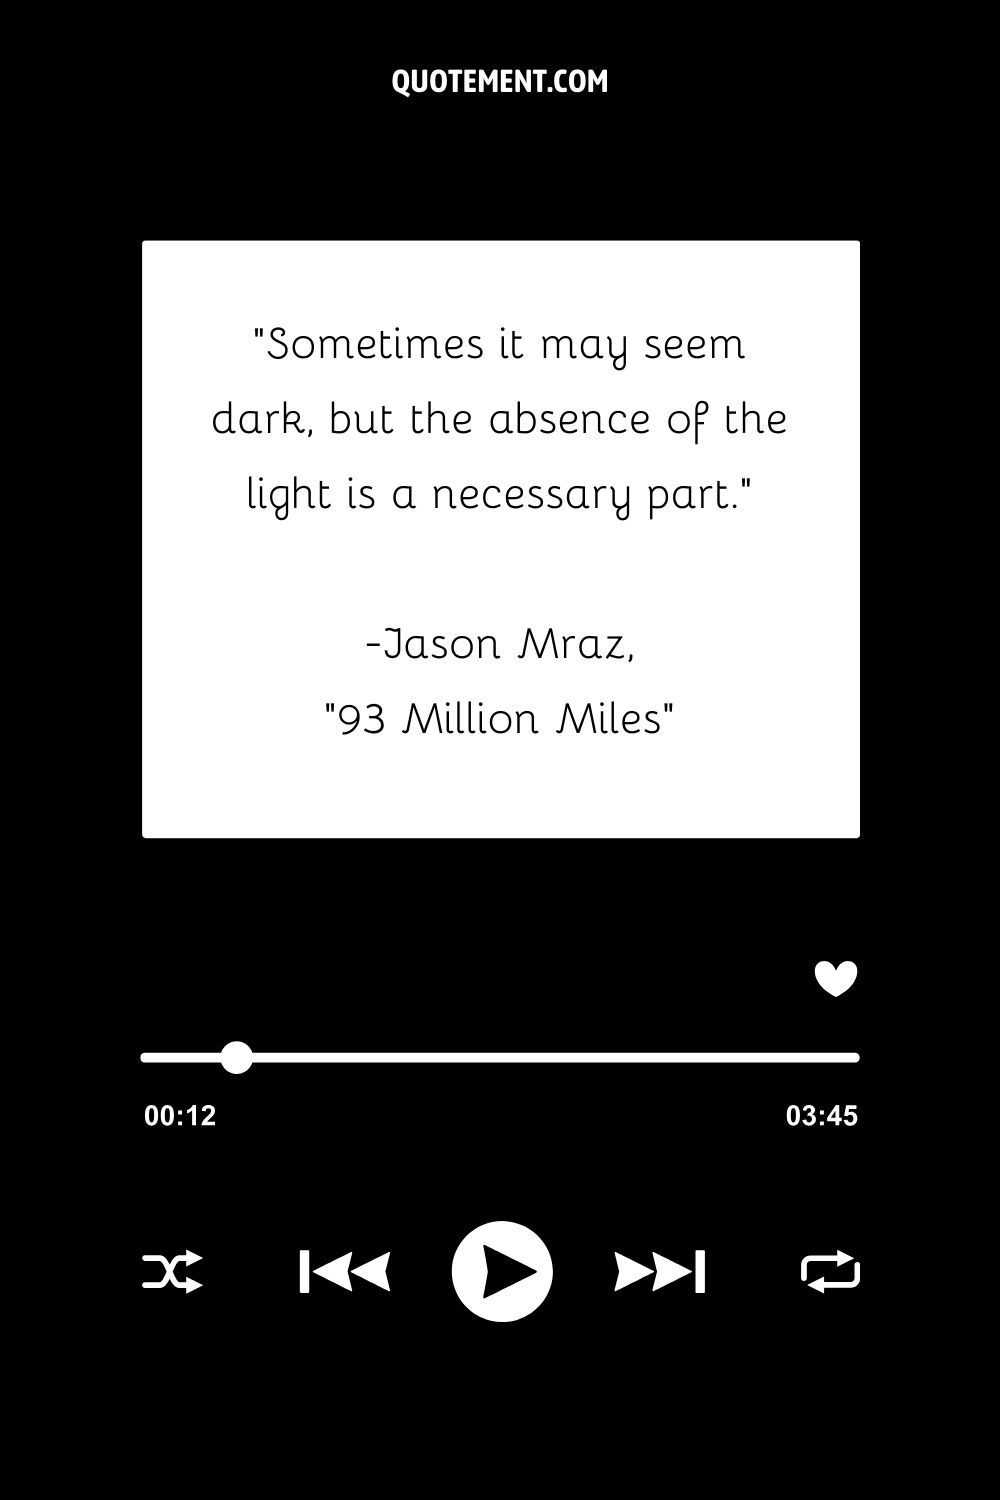 “Sometimes it may seem dark, but the absence of the light is a necessary part.” — Jason Mraz, “93 Million Miles”